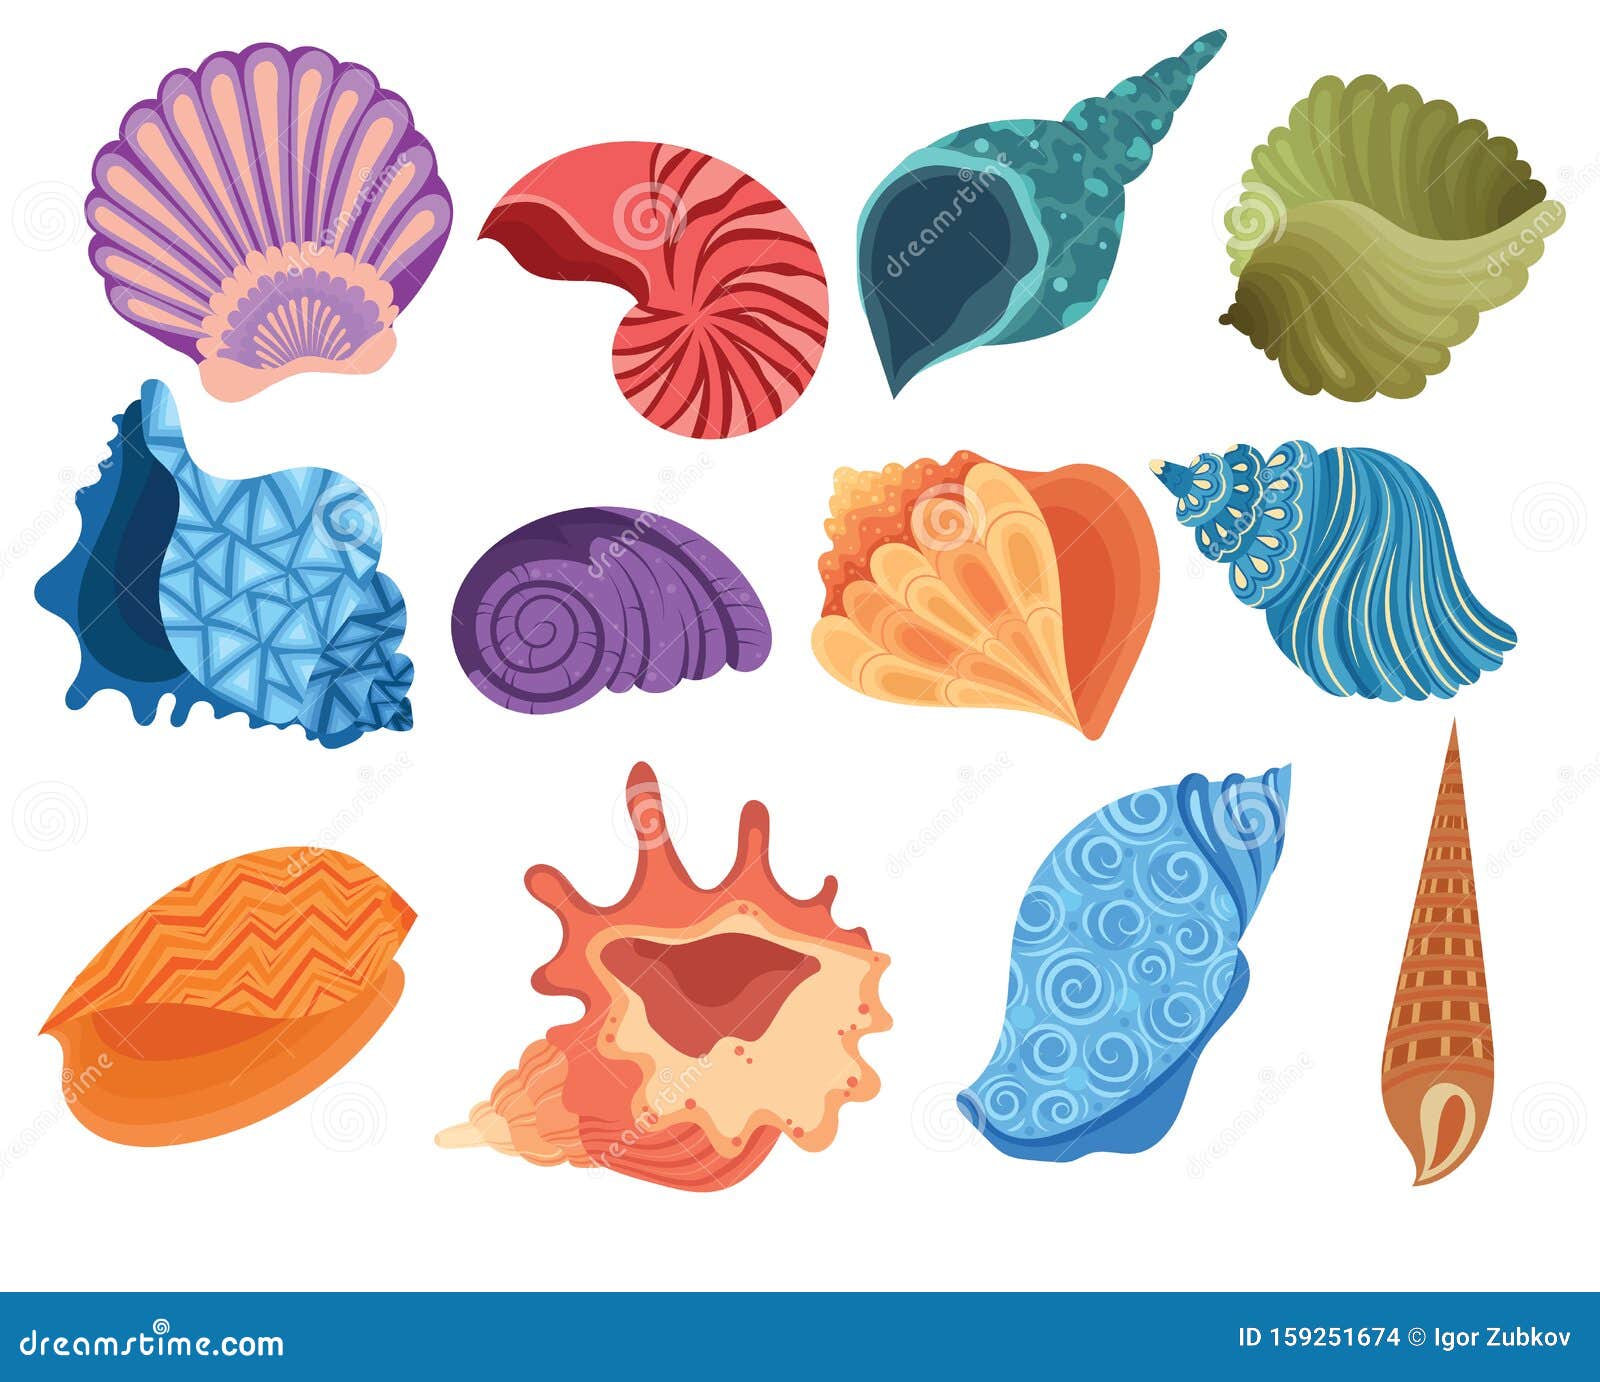 set of cartoon seashells. a collection of sea shells with pearls.   of mollusks. drawing for children.